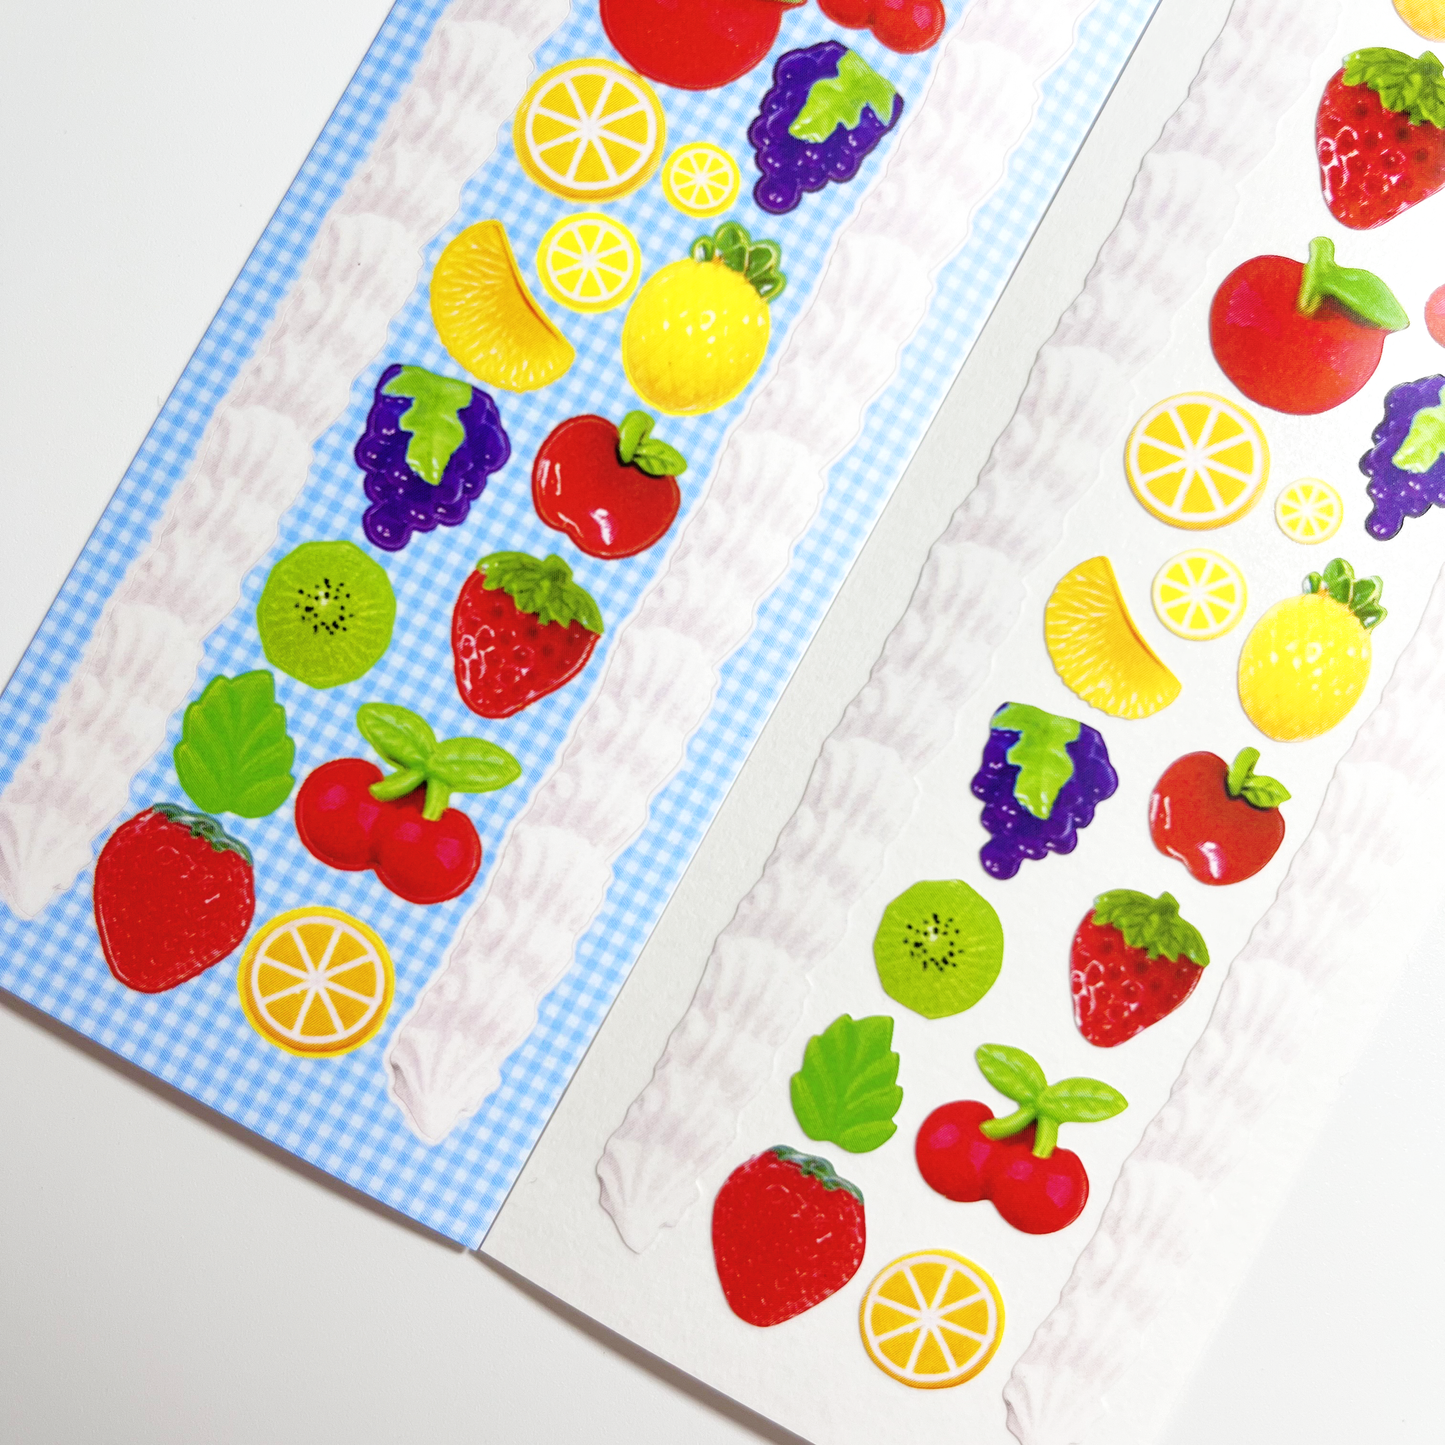 [Cherry and Night] Fruits Decoden Stickers